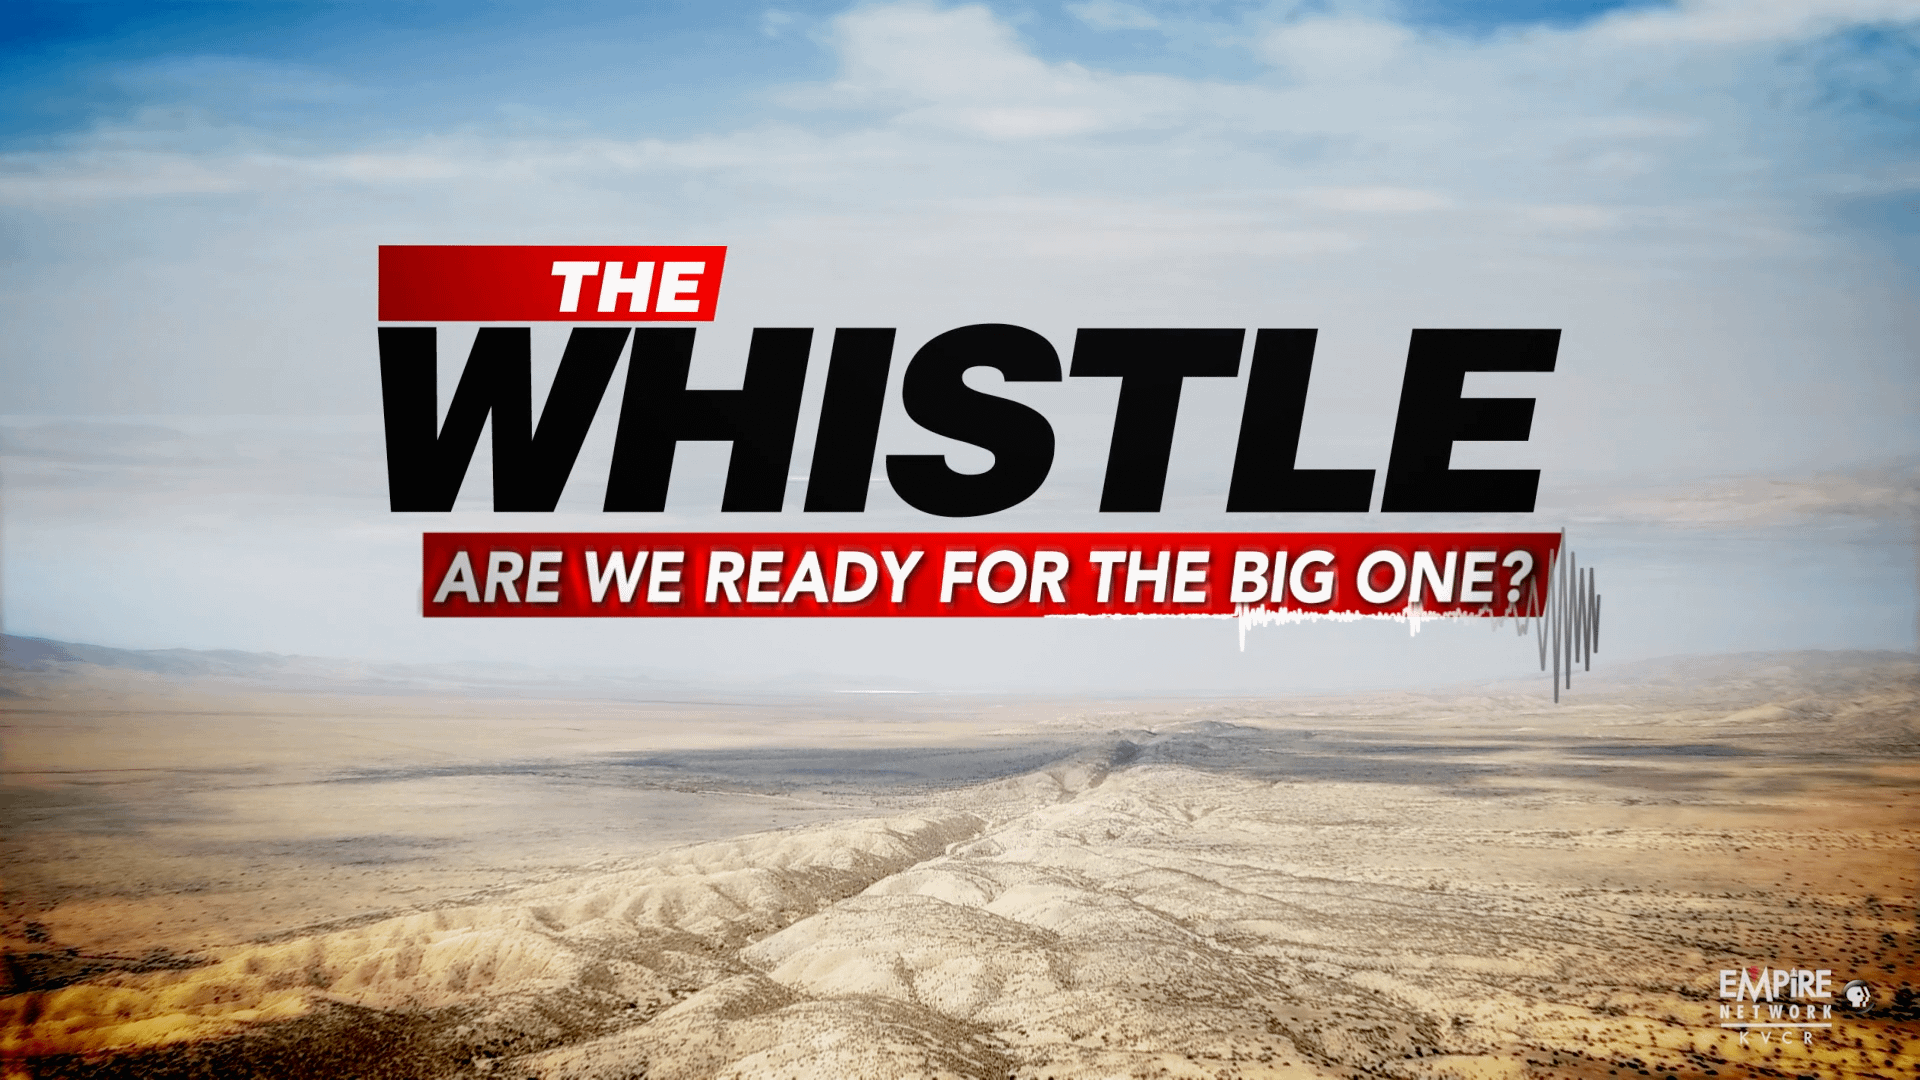 The Whistle: Are We Ready for the Big One? Serie documental